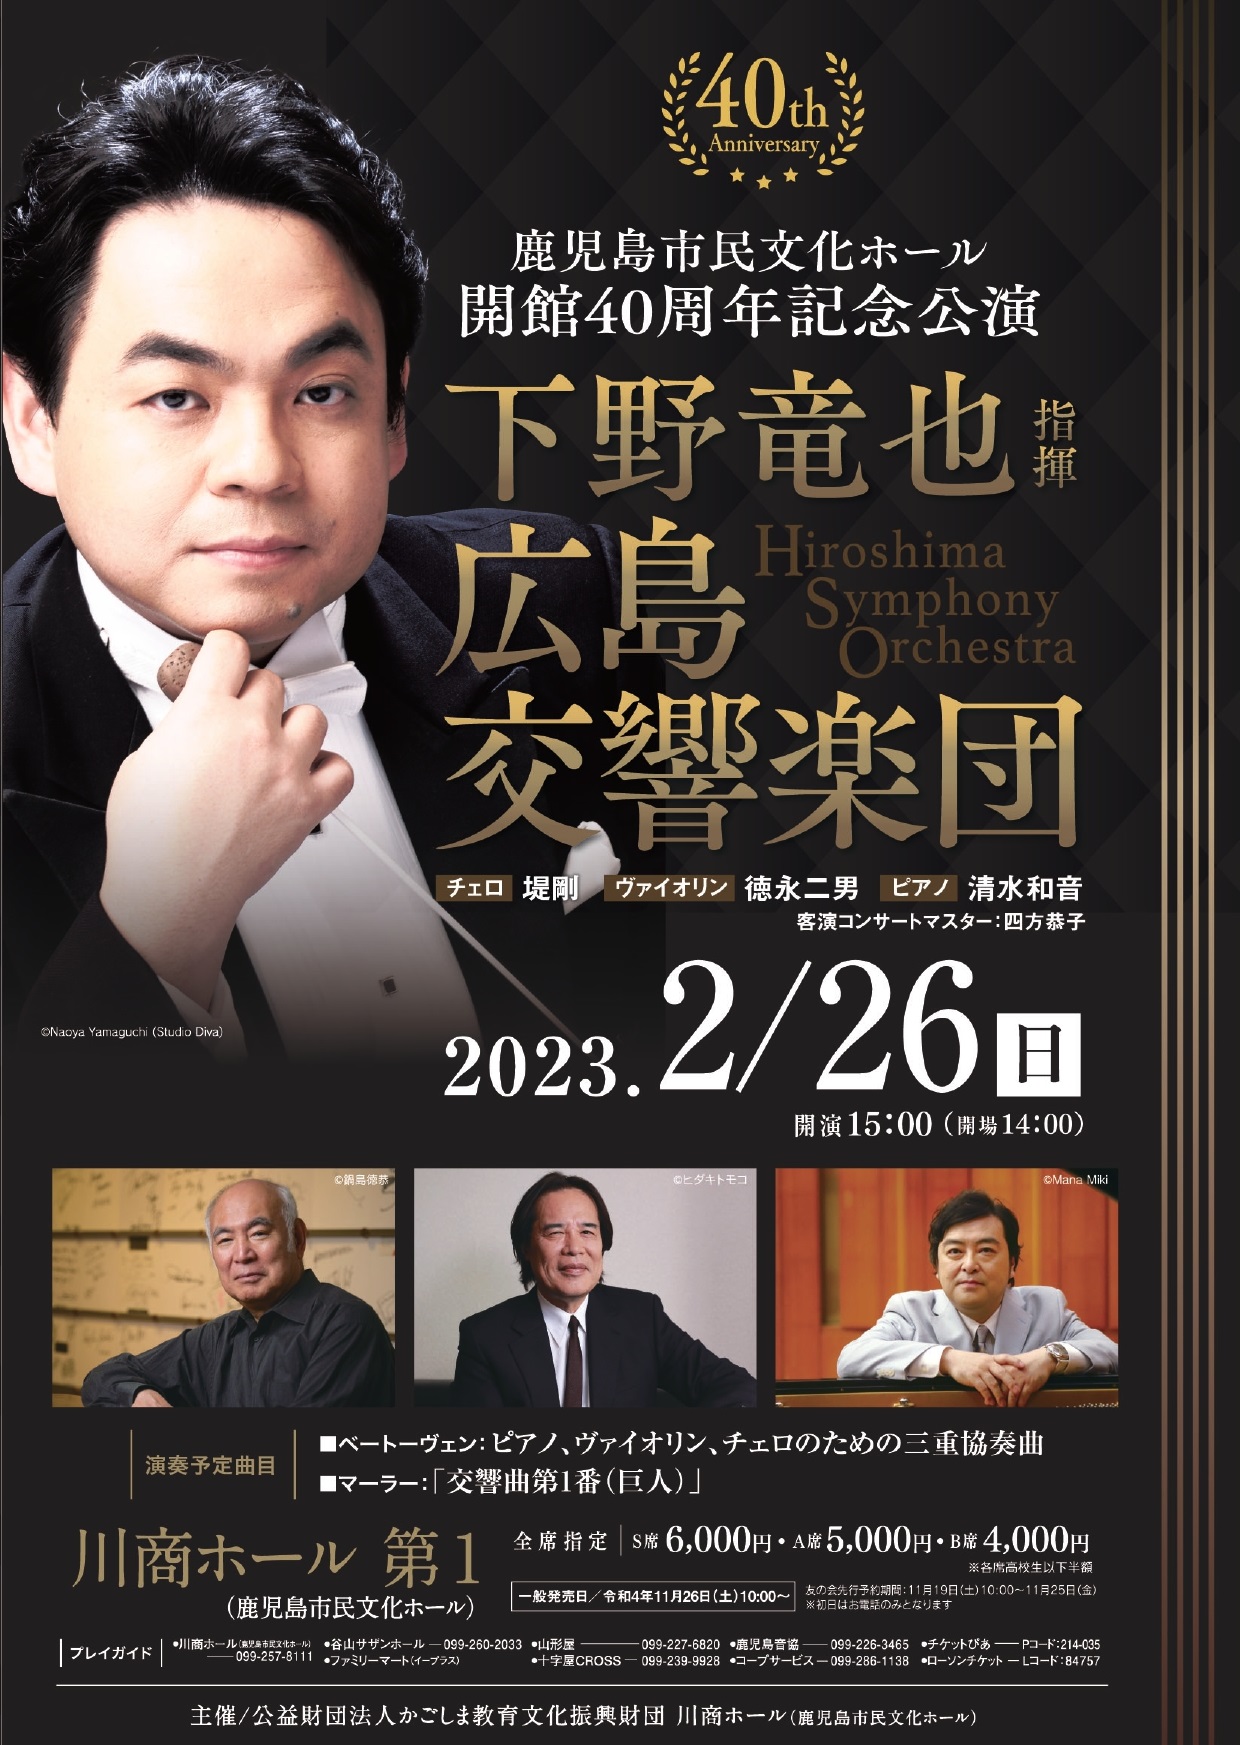 This week’s concert (20 February – 26 February 2023)